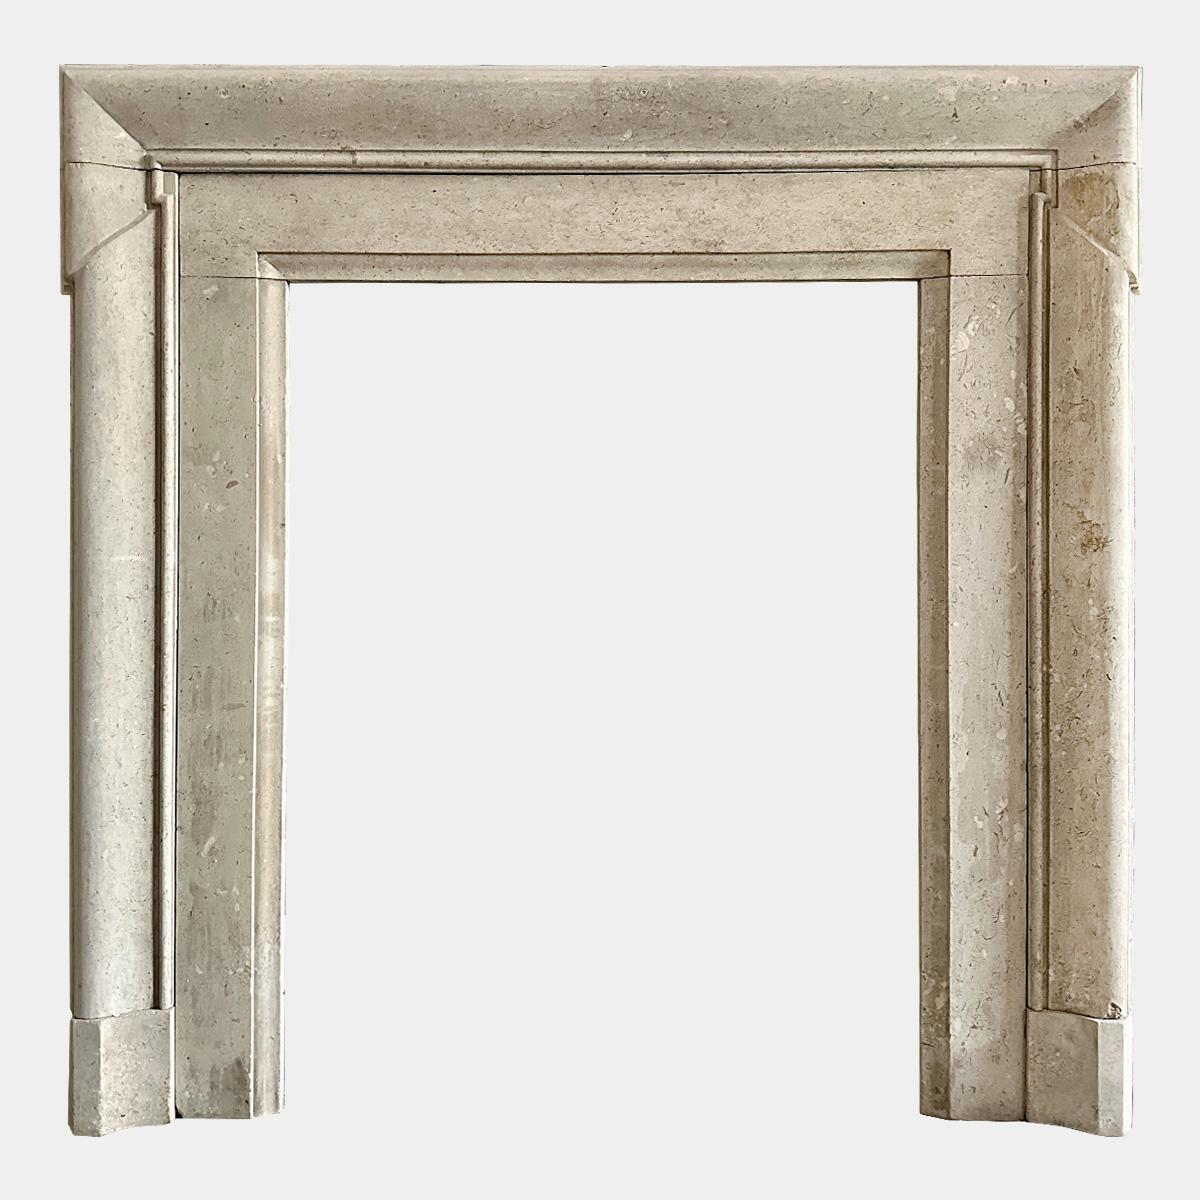 A tall and unusual architectural designed Bolection style fireplace in Portland Roach stone, known for its heavy fossil content. The frame with a  gentle curved moulding and the header cut with a 